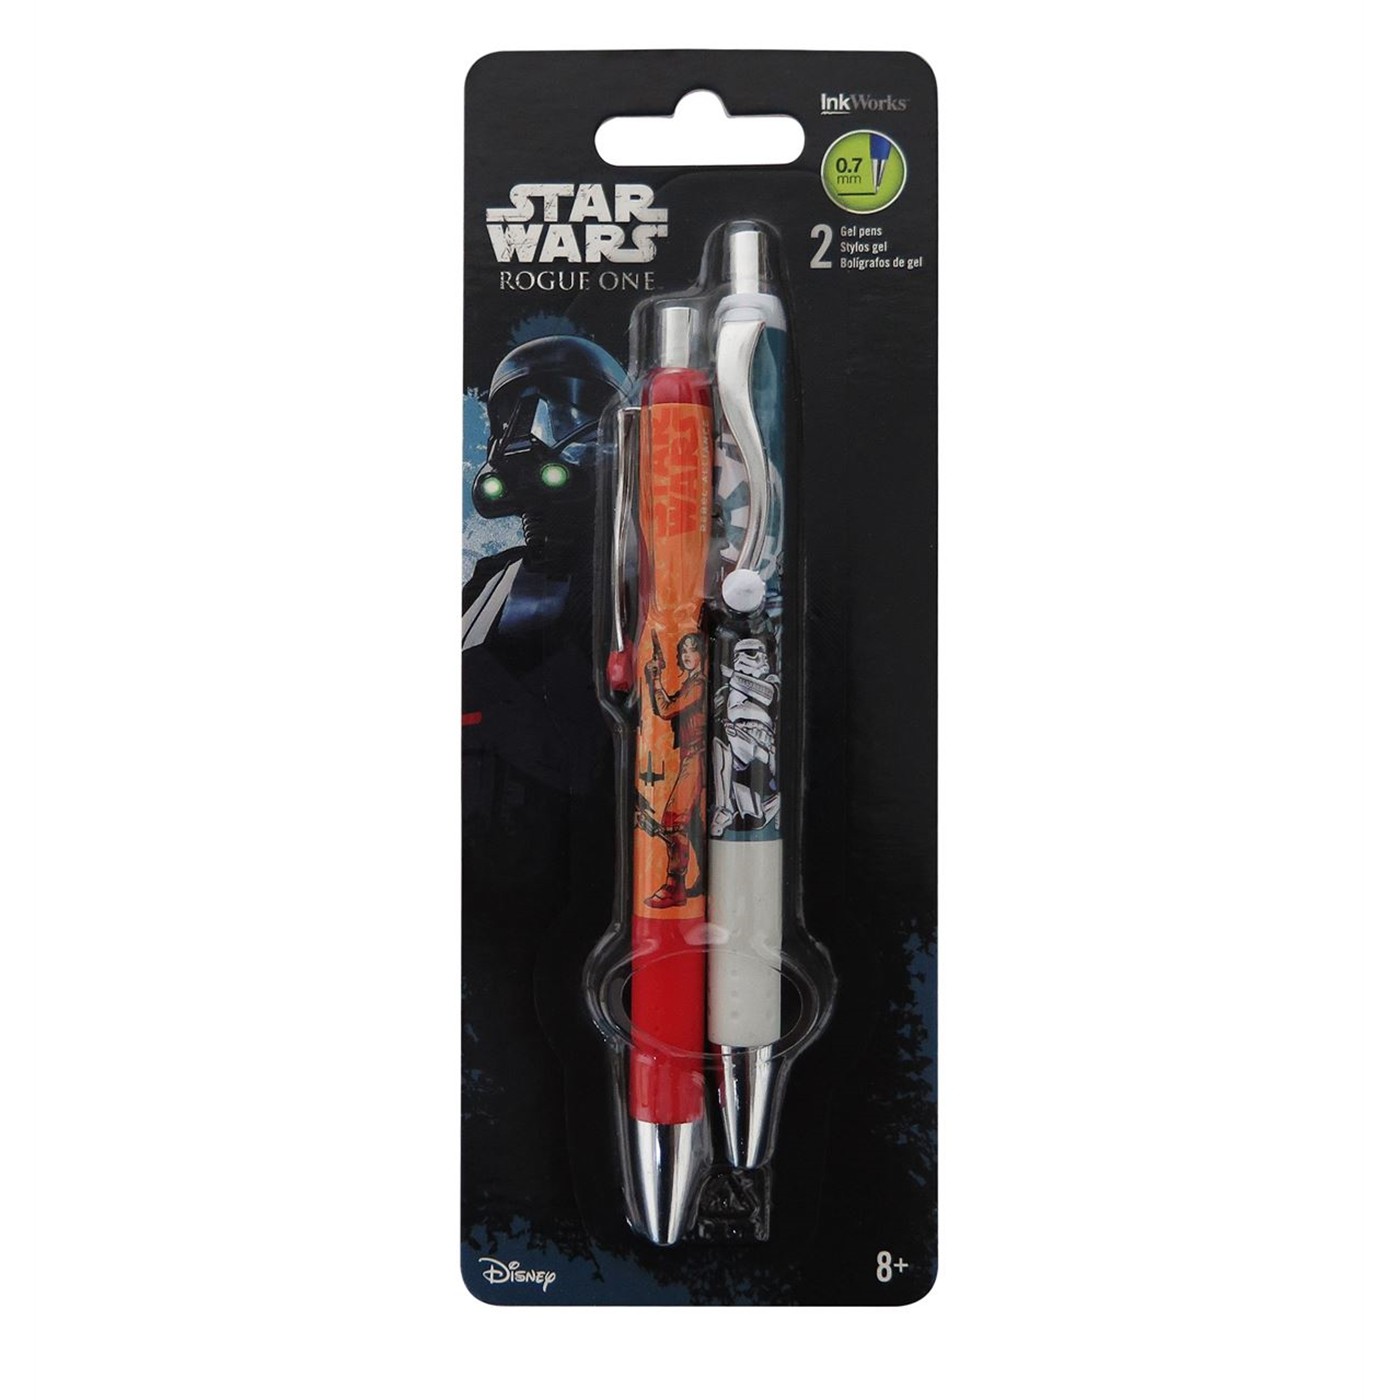 Star Wars Rogue One Pen 2-Pack